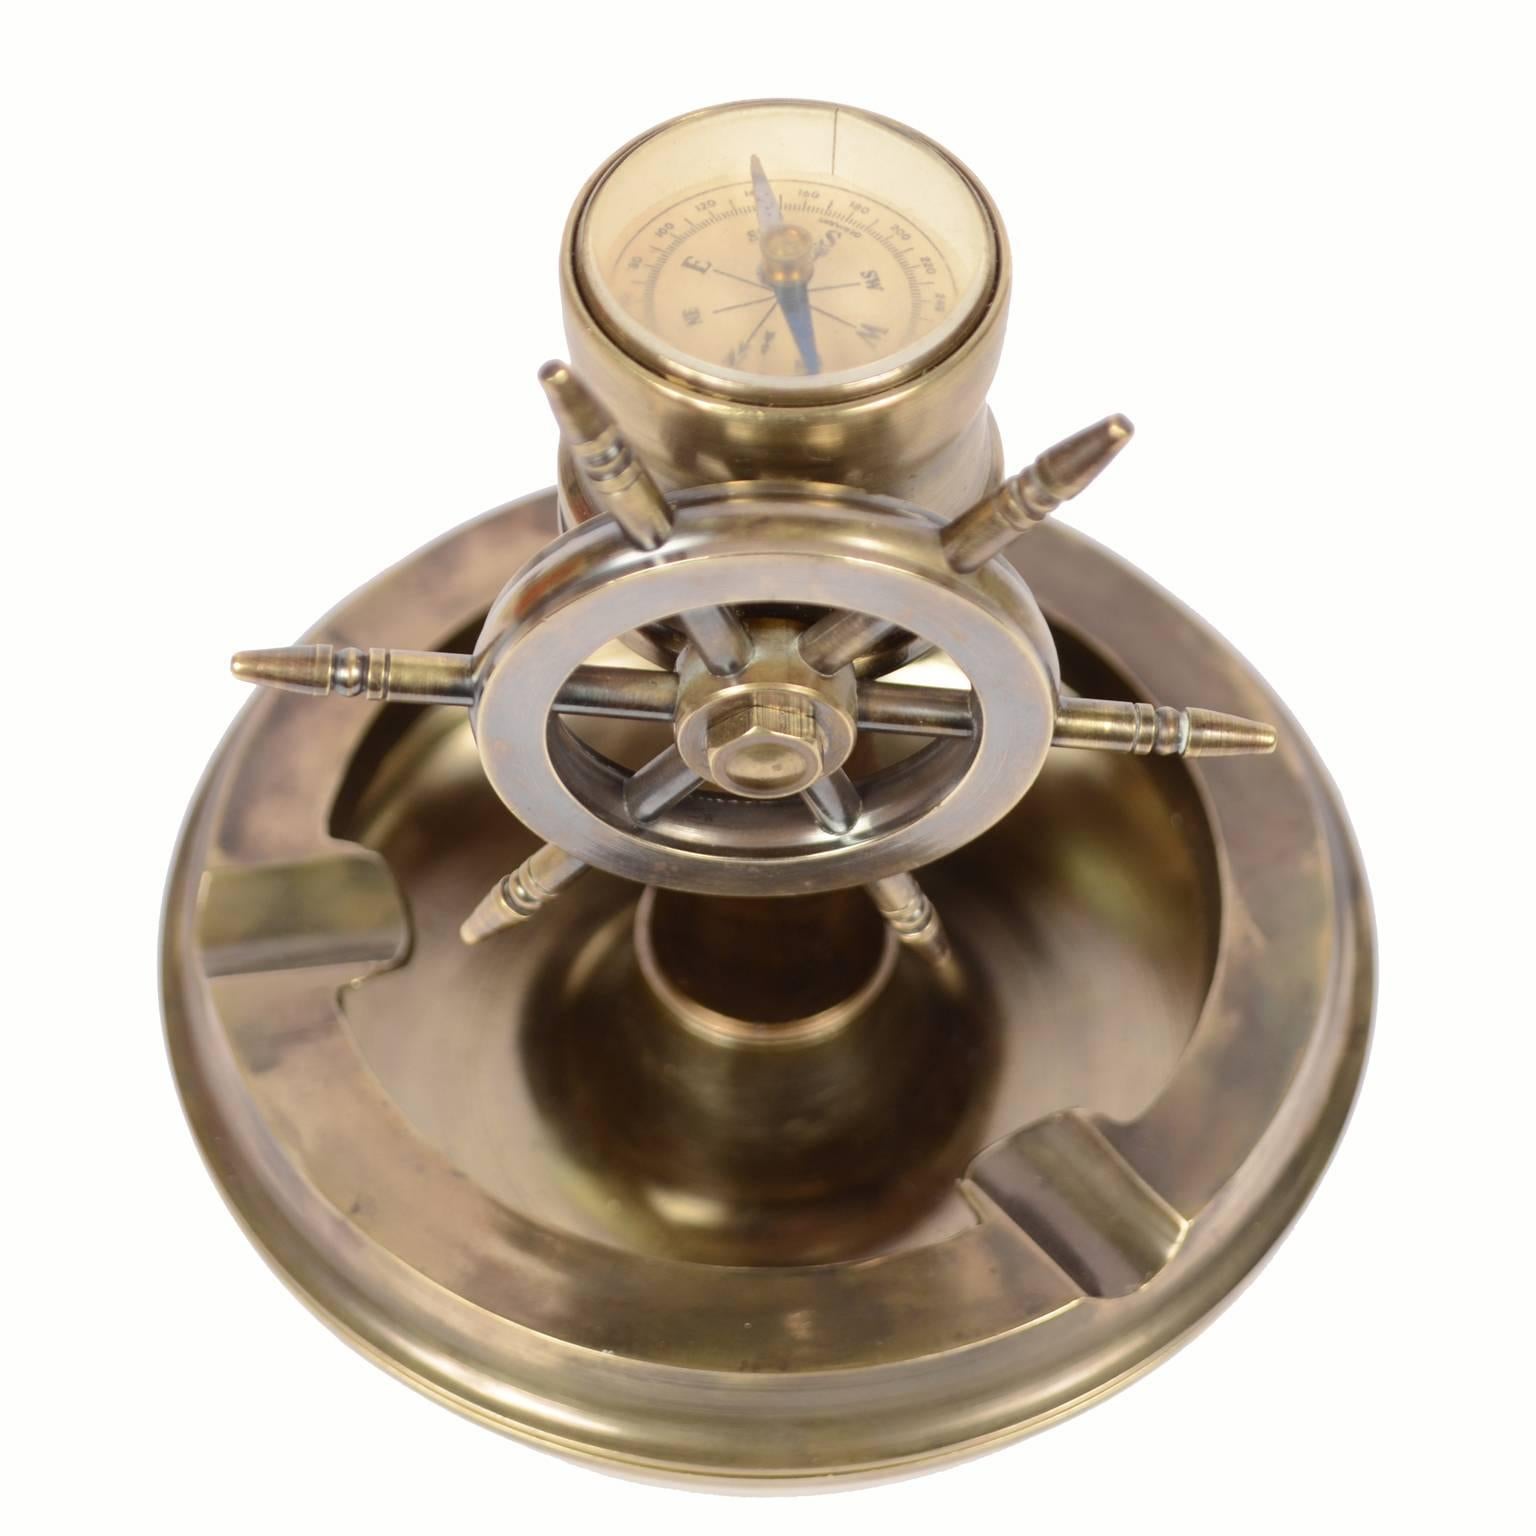 British Brass Ashtray with Rudder and Compass, 1950s